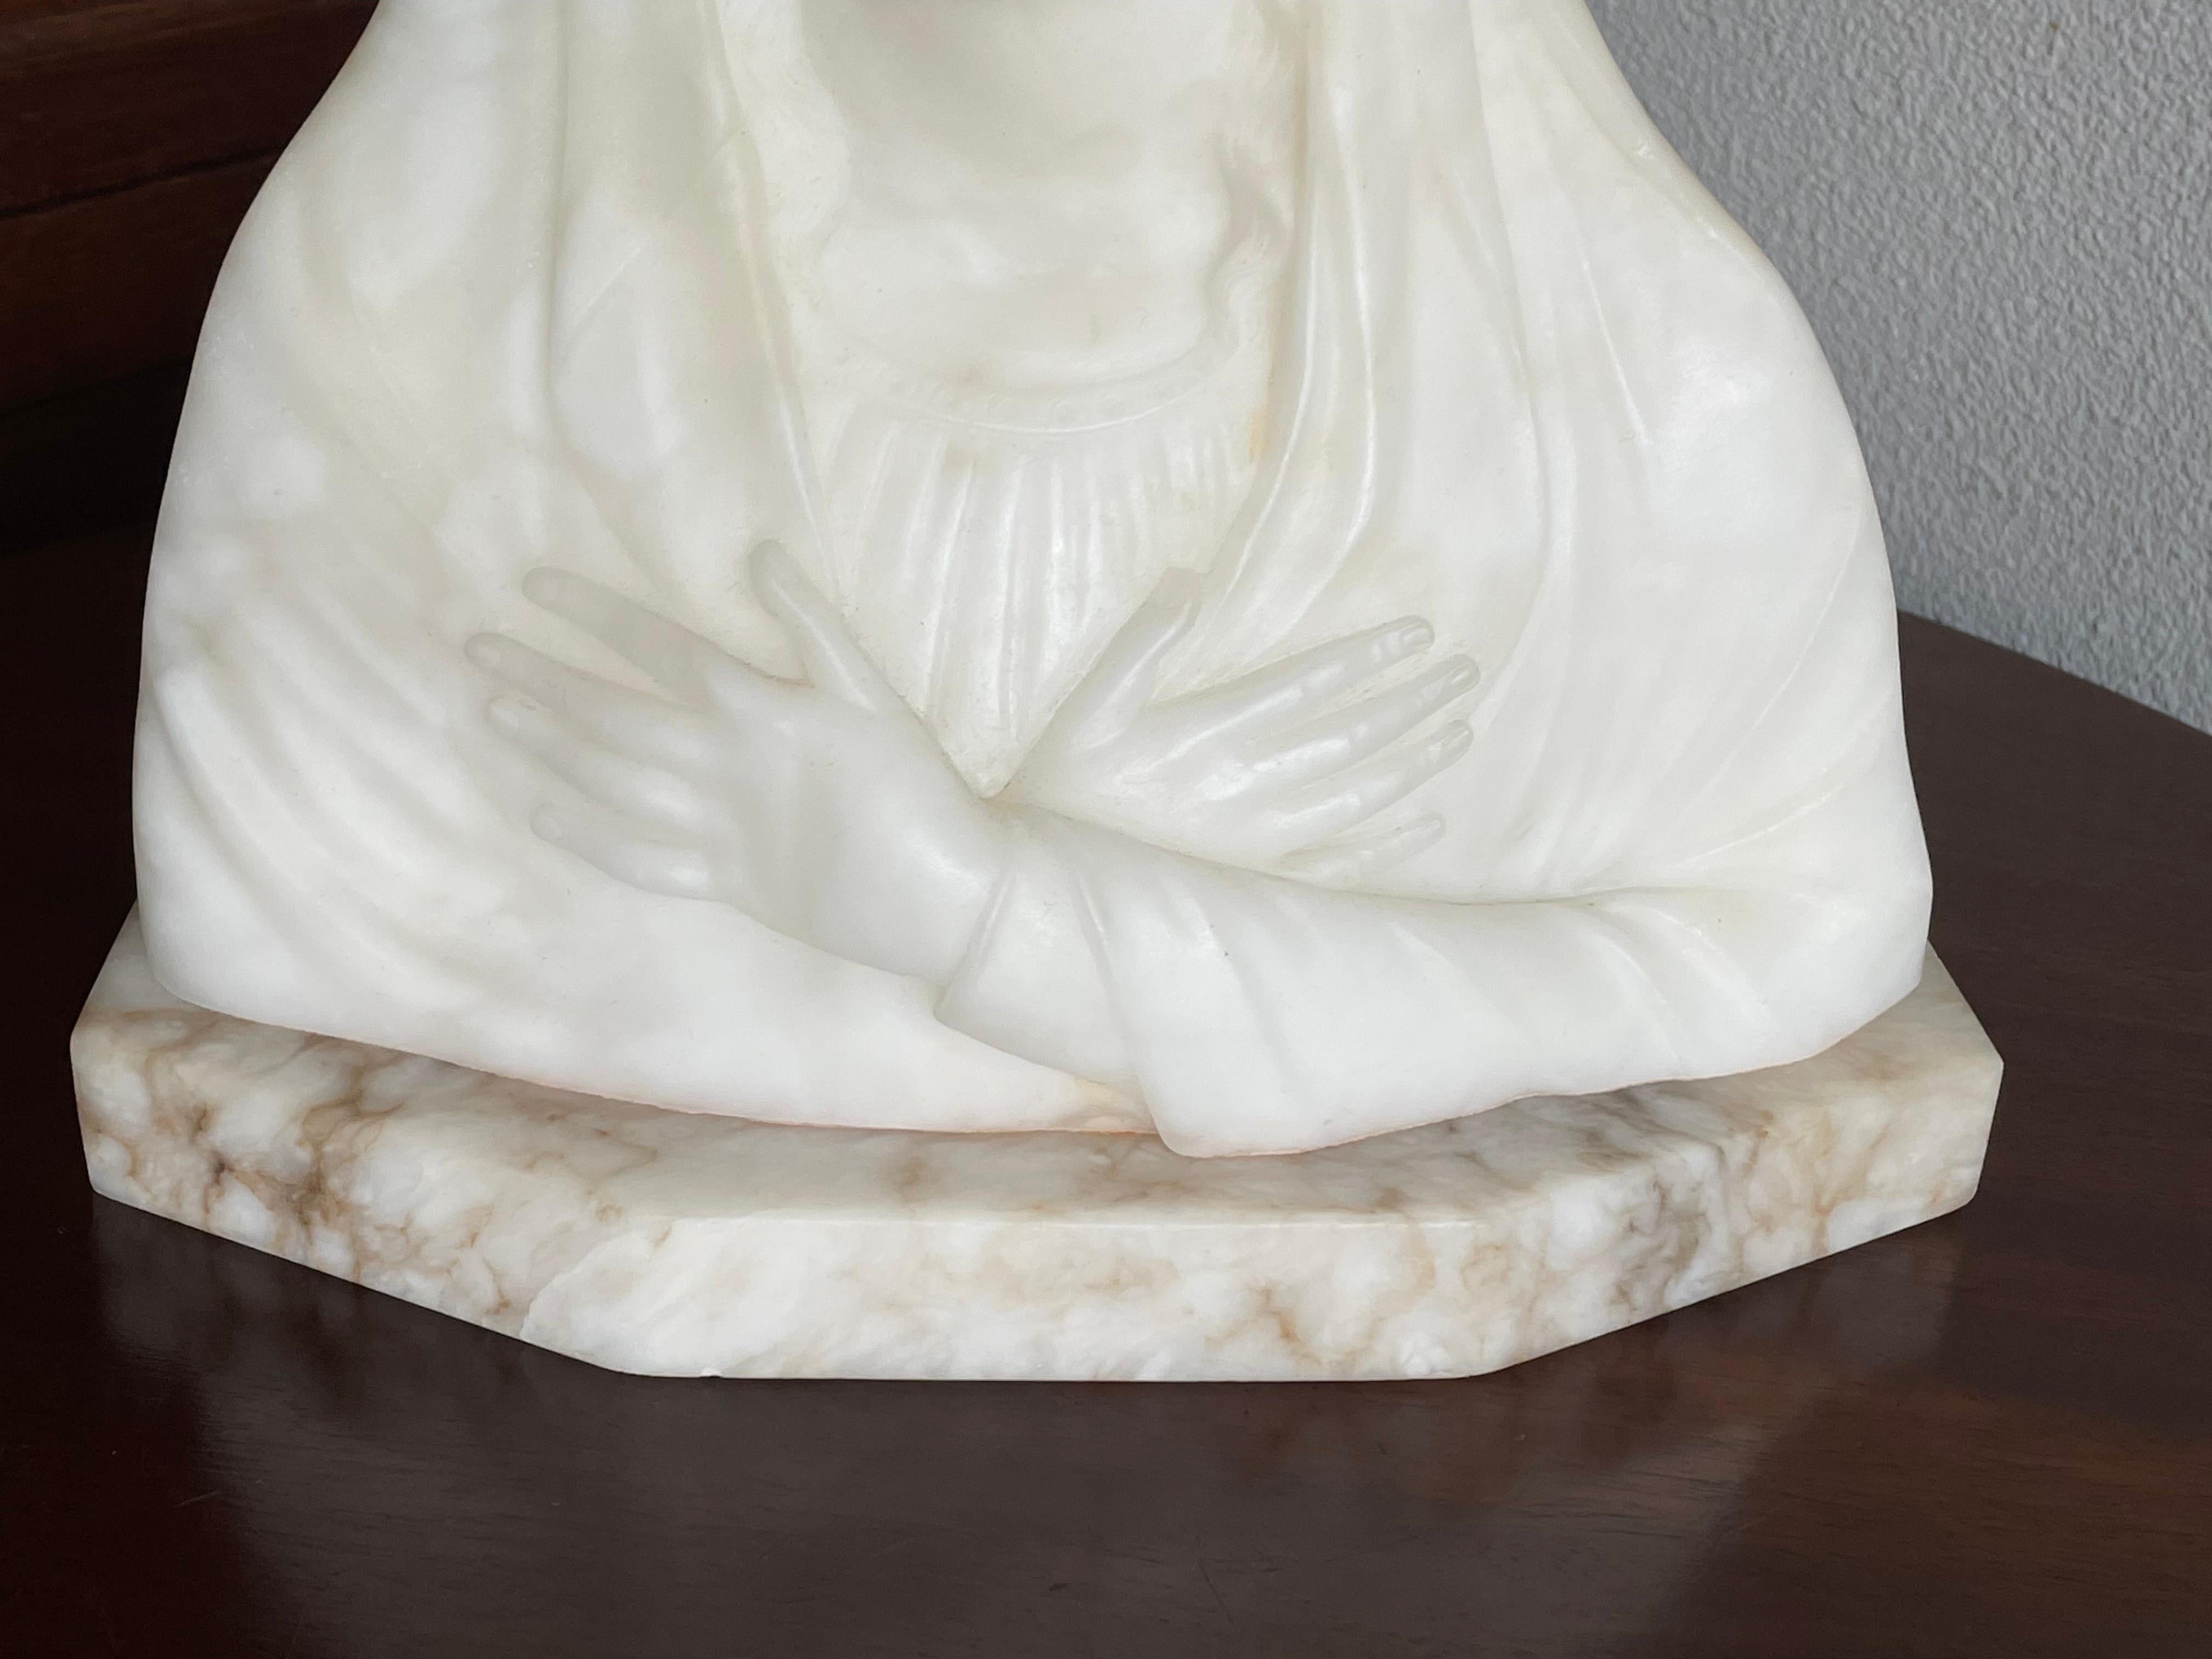 Gothic Revival Rare Hand Carved Early 1900s Alabaster Bust Sculpture of a Mourning Virgin Mary